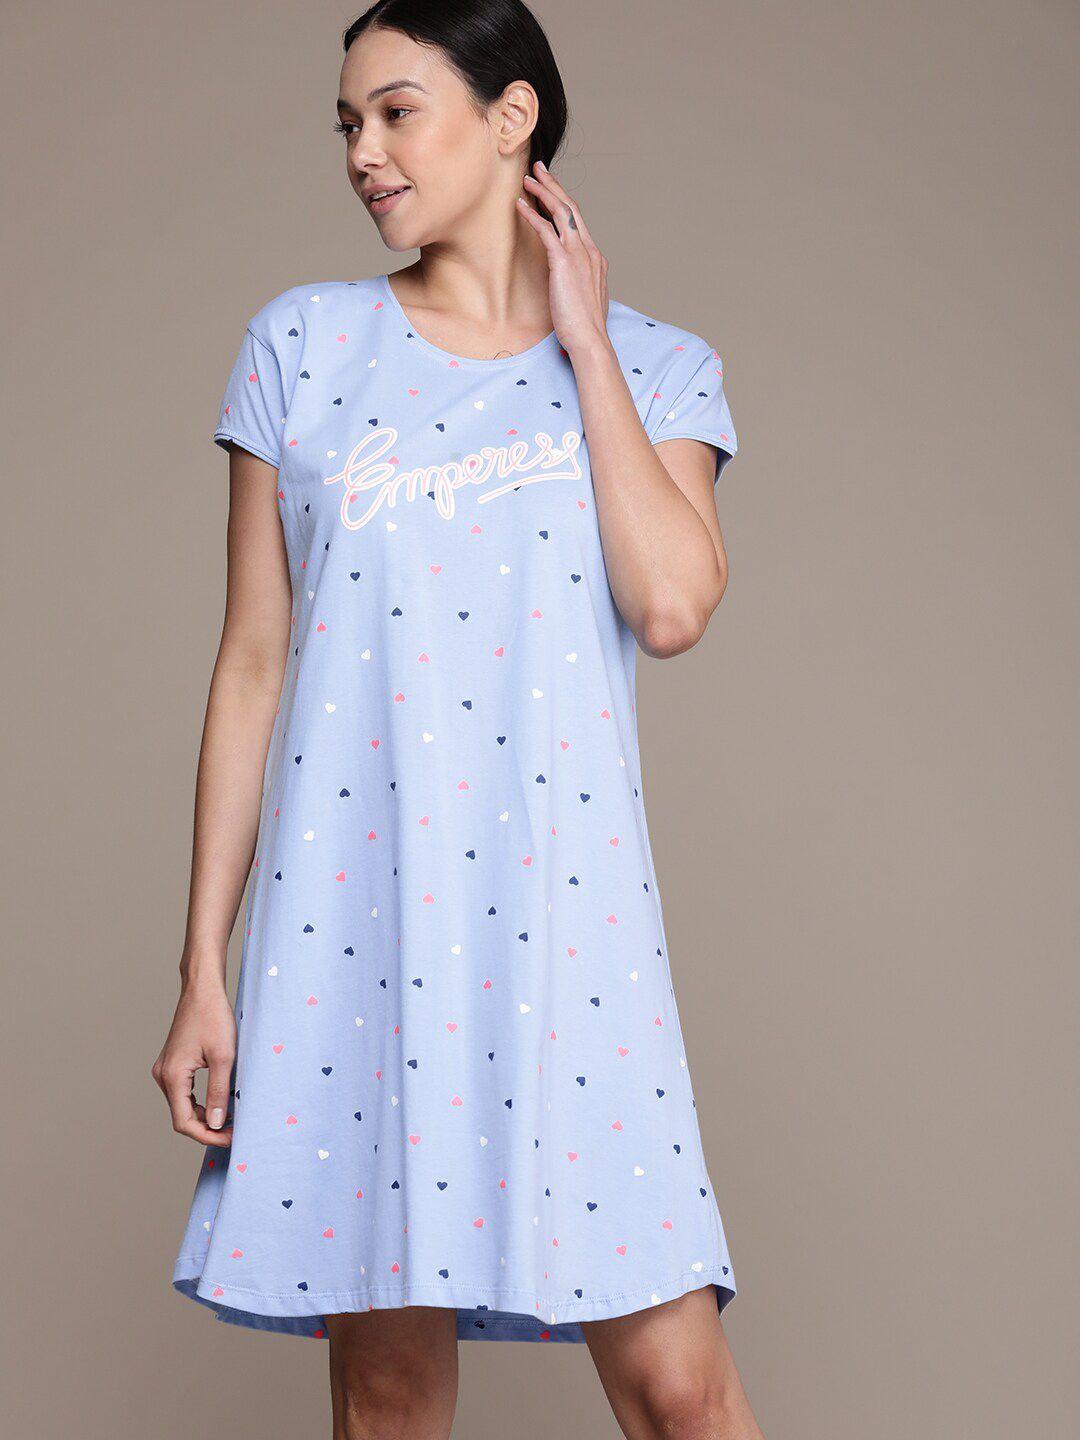 beebelle conversational printed pure cotton nightdress